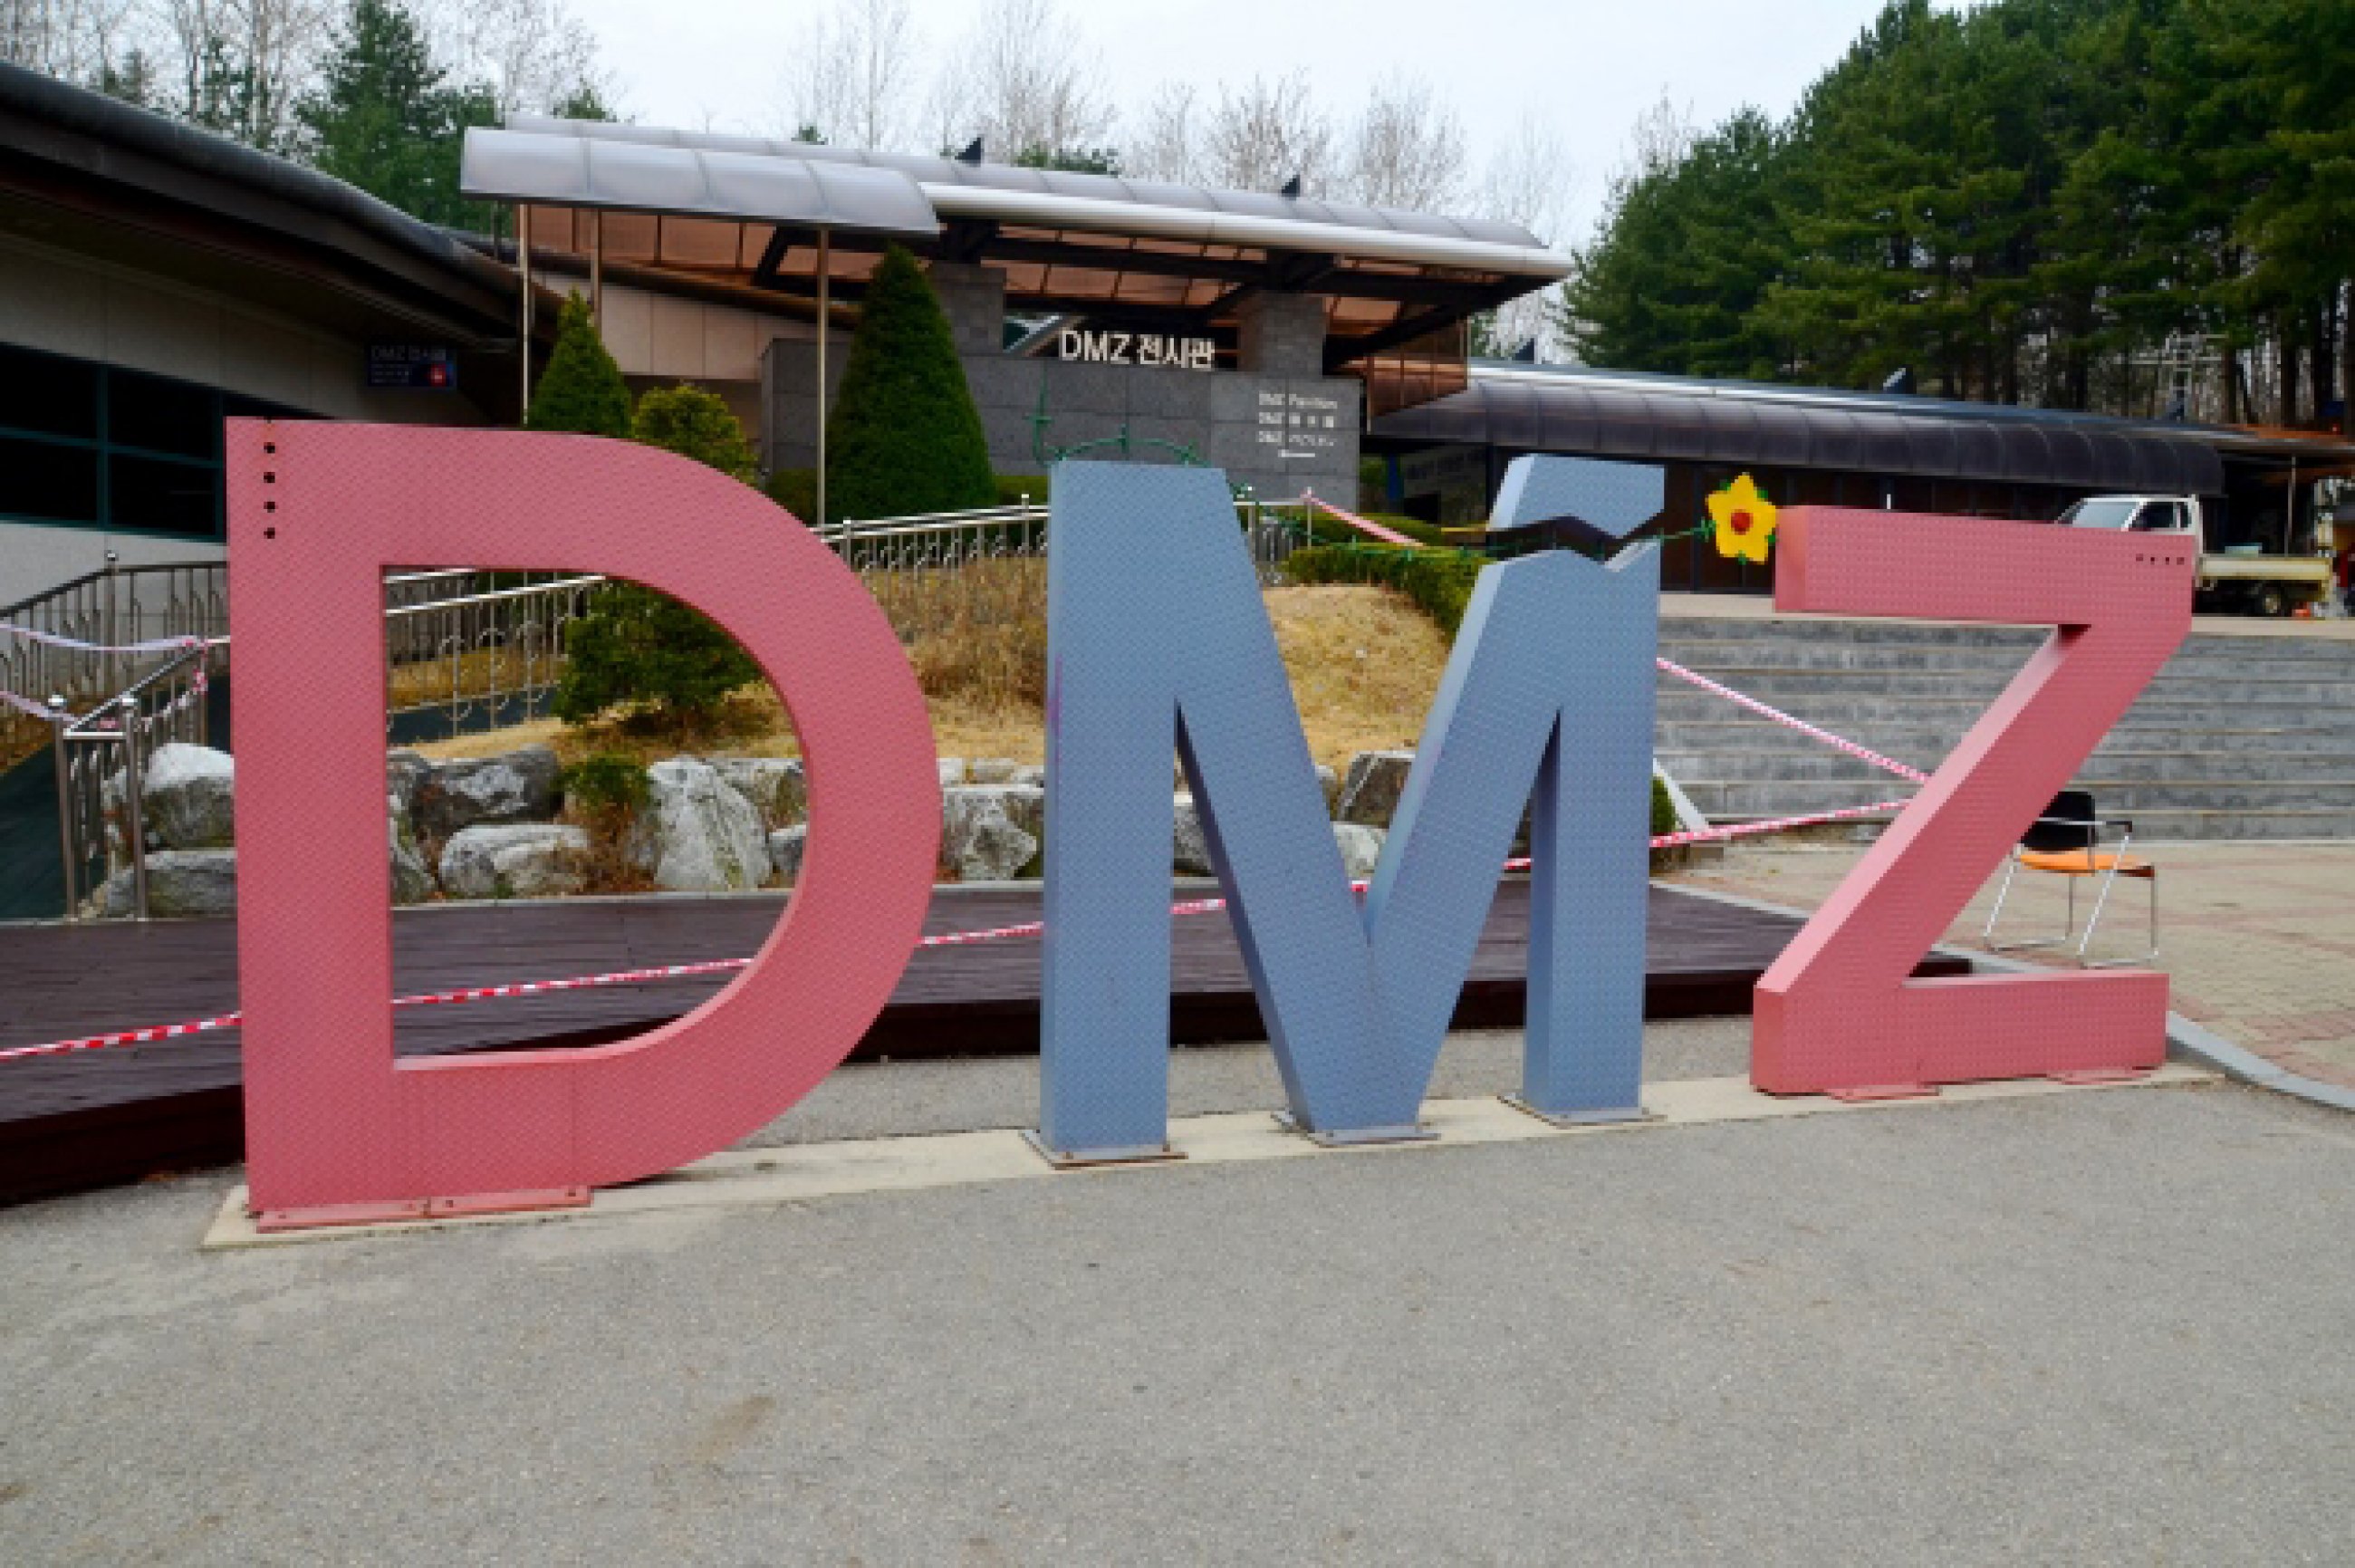 https://bubo.sk/uploads/galleries/7452/dmz-sign-paju-south-korea.-the-korean-demilitarized-zone-is-a-strip-of-land-running-across-the-korean-peninsula-that-serves-as-a-buffer-zone-between-north-and-south-korea..jpg